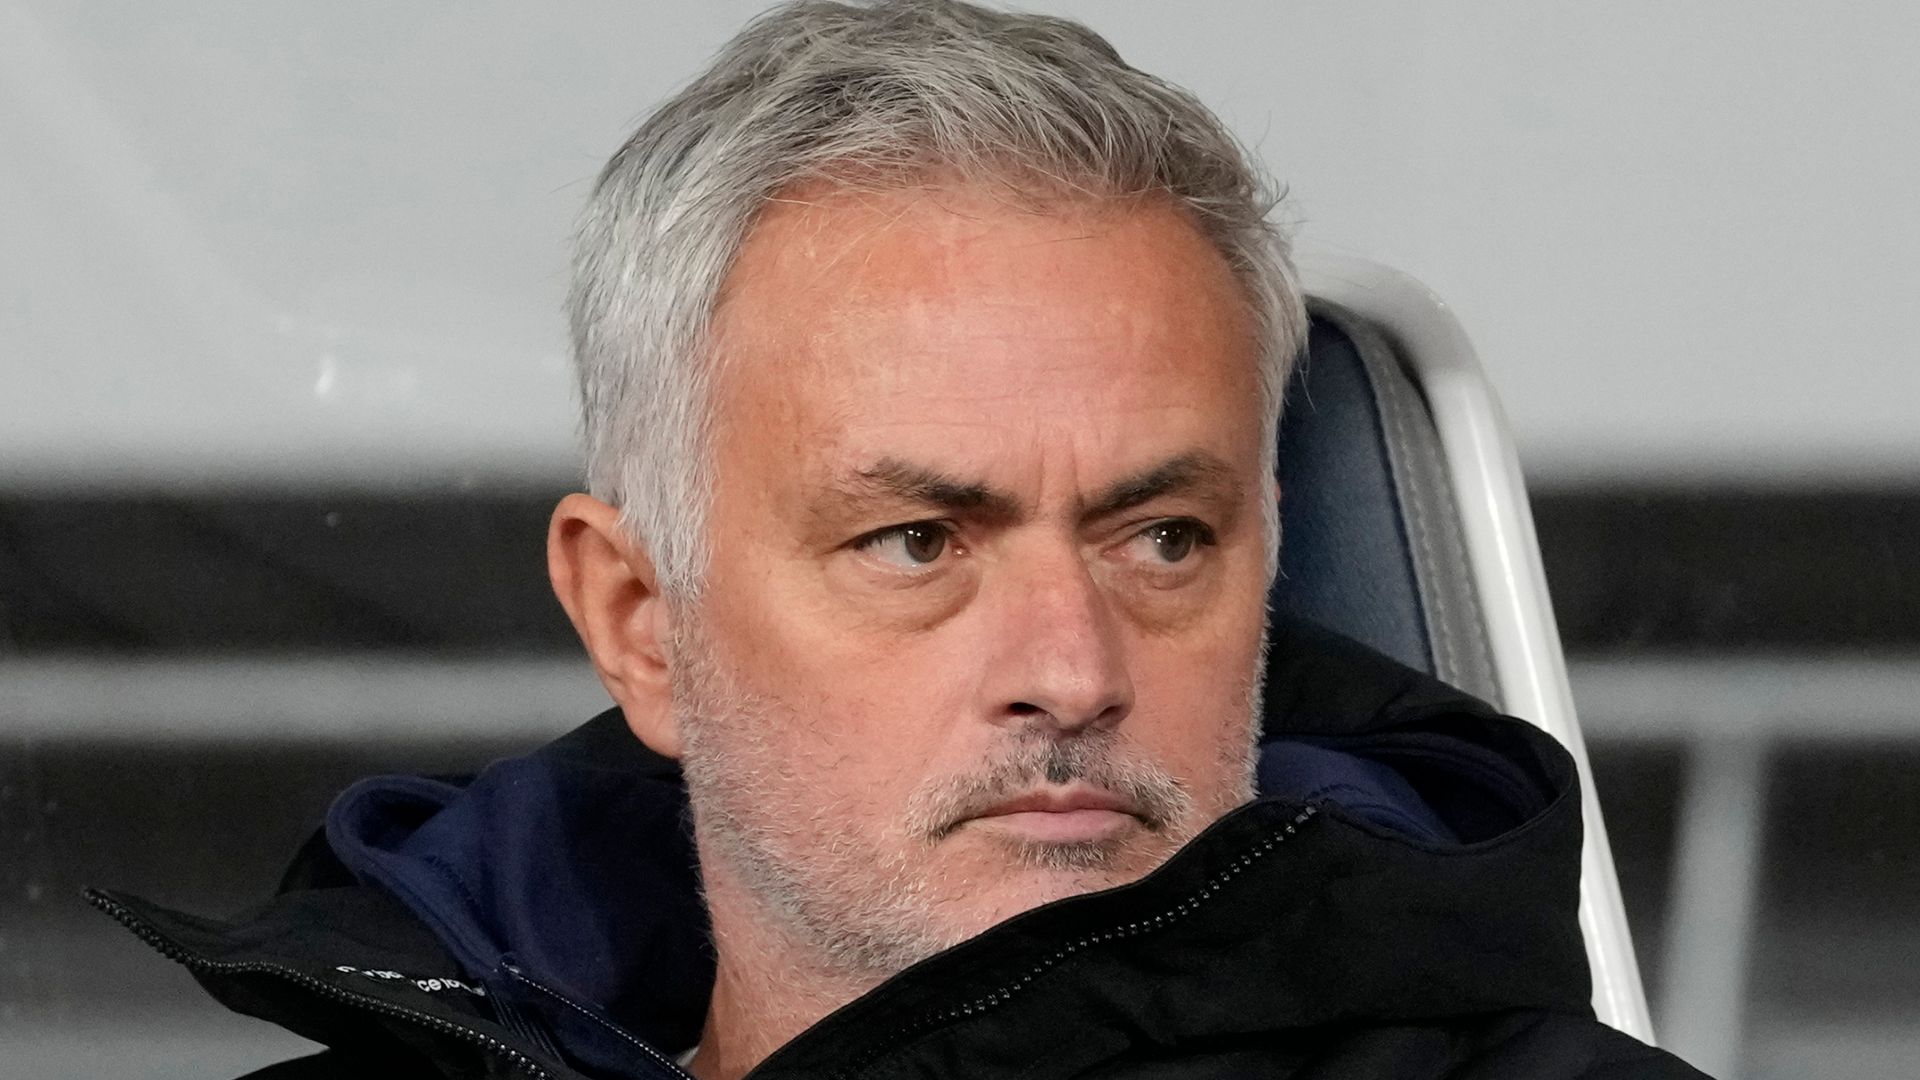 PSG show tentative early interest in Mourinho becoming their next boss